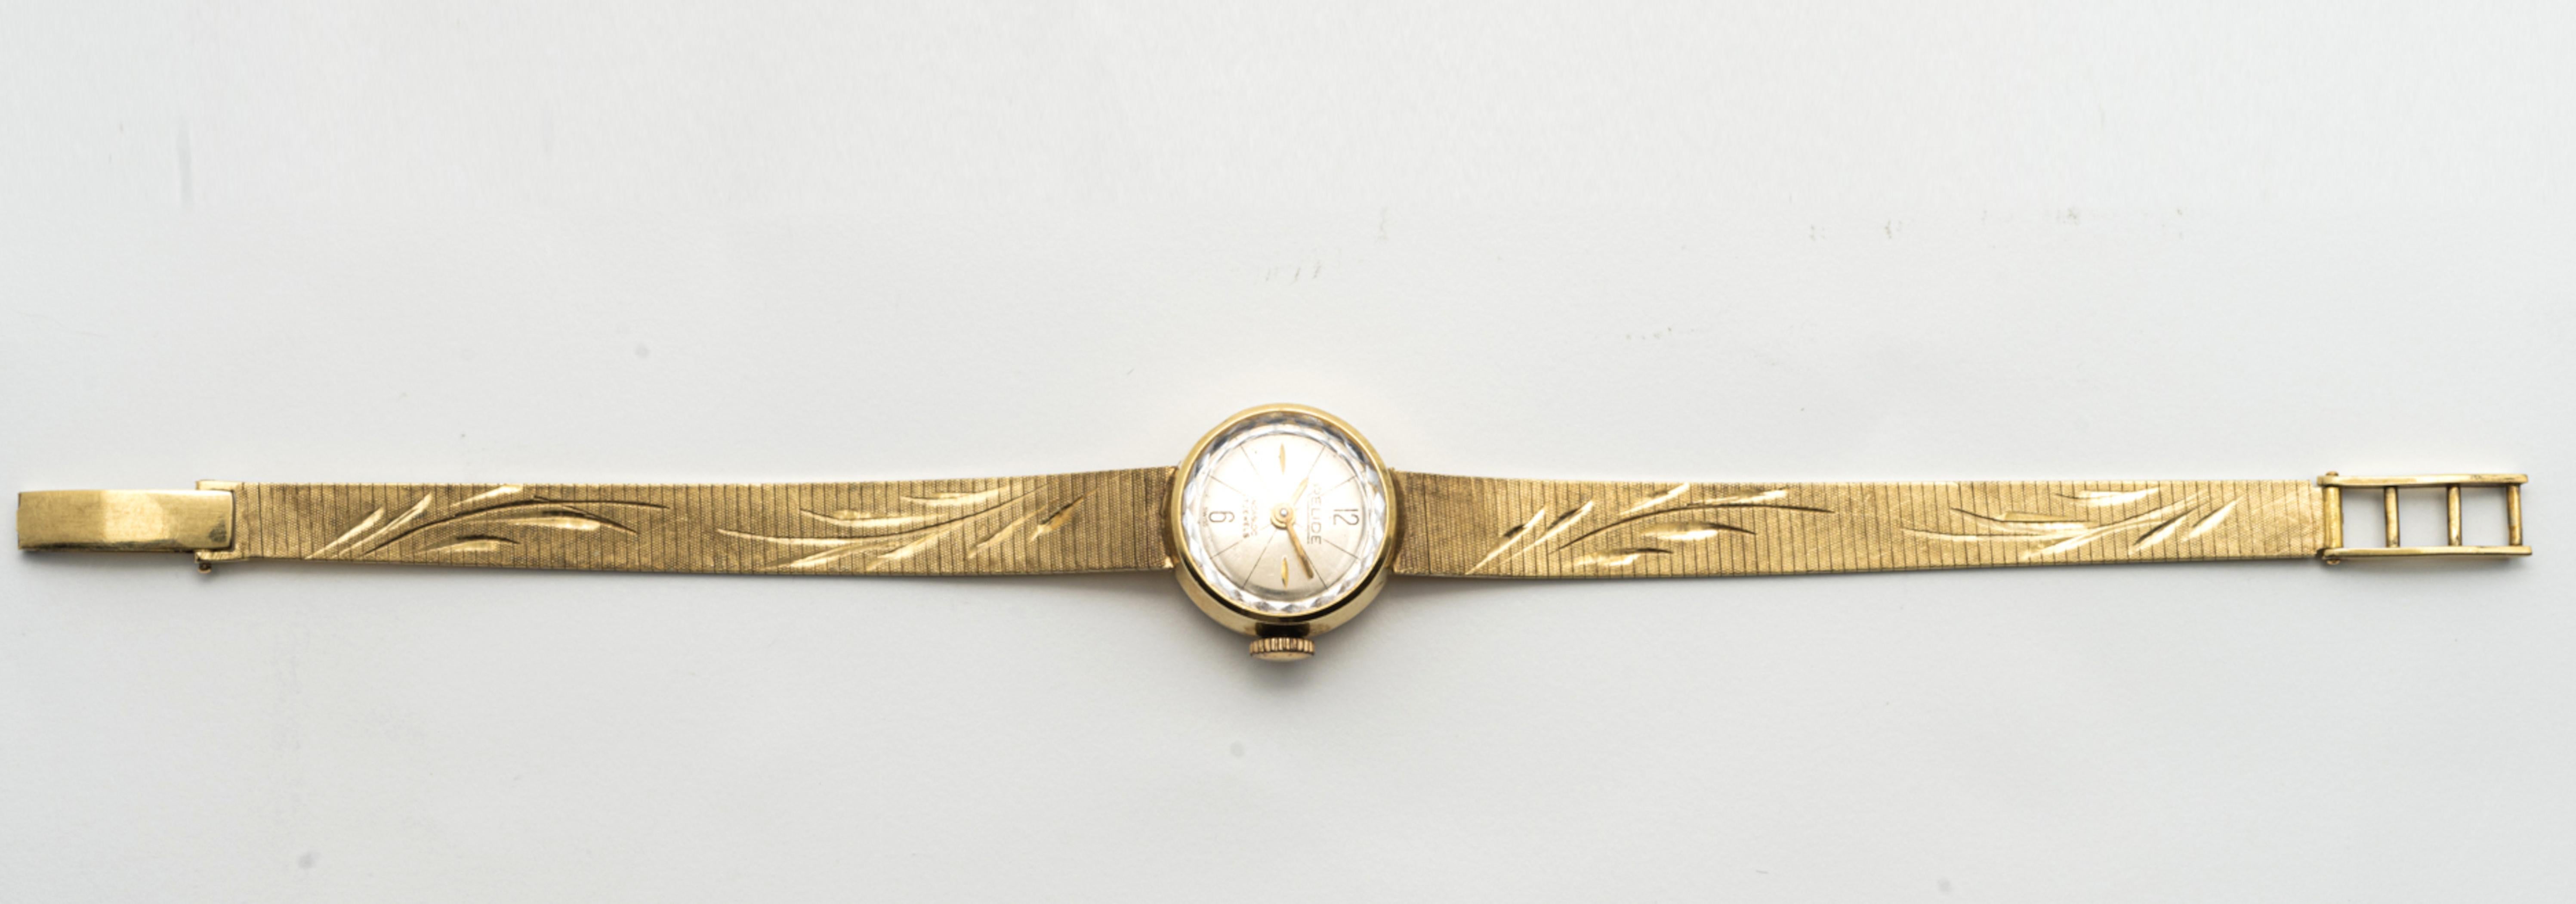 Relude
Yellow Gold Wristwatch with Bracelet
Dial: gilt
Calibre: manual winding
Case: 14k yellow gold, snap-on back
Closure: 14k yellow gold bracelet and locking clasp
Dimensions: 18 x 16 mm, bracelet length 7 in. (max.)
